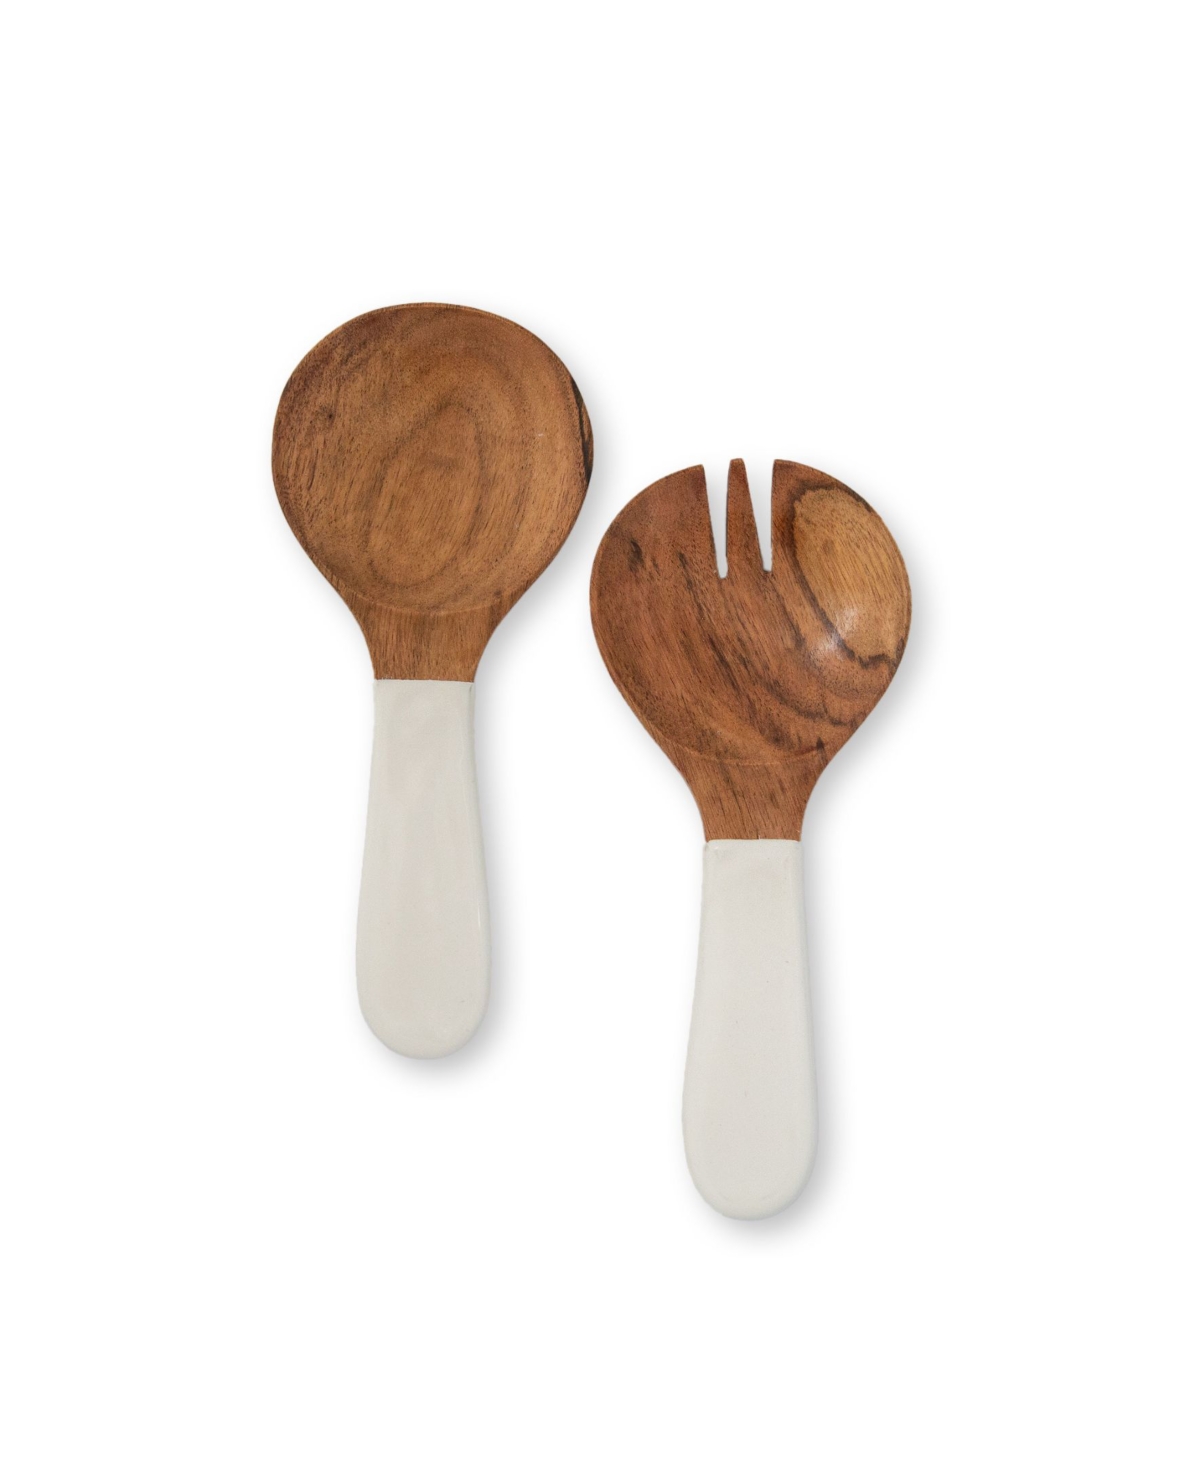 Jeanne Fitz Wood Plus Collection Acacia Wood Salad Servers In Brown And White